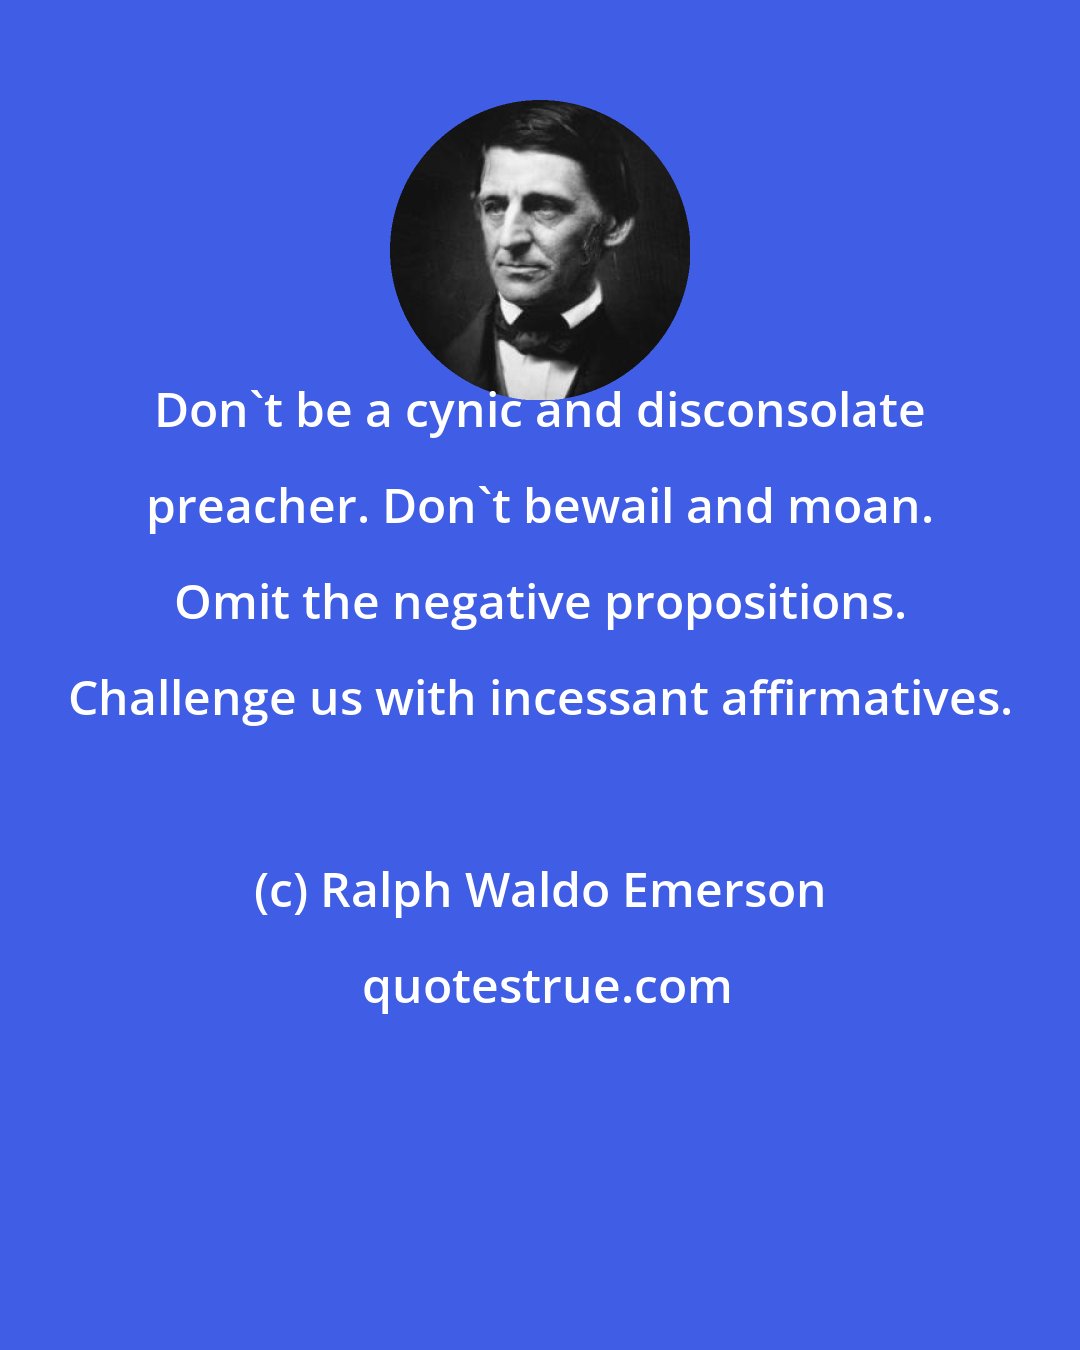 Ralph Waldo Emerson: Don't be a cynic and disconsolate preacher. Don't bewail and moan. Omit the negative propositions. Challenge us with incessant affirmatives.